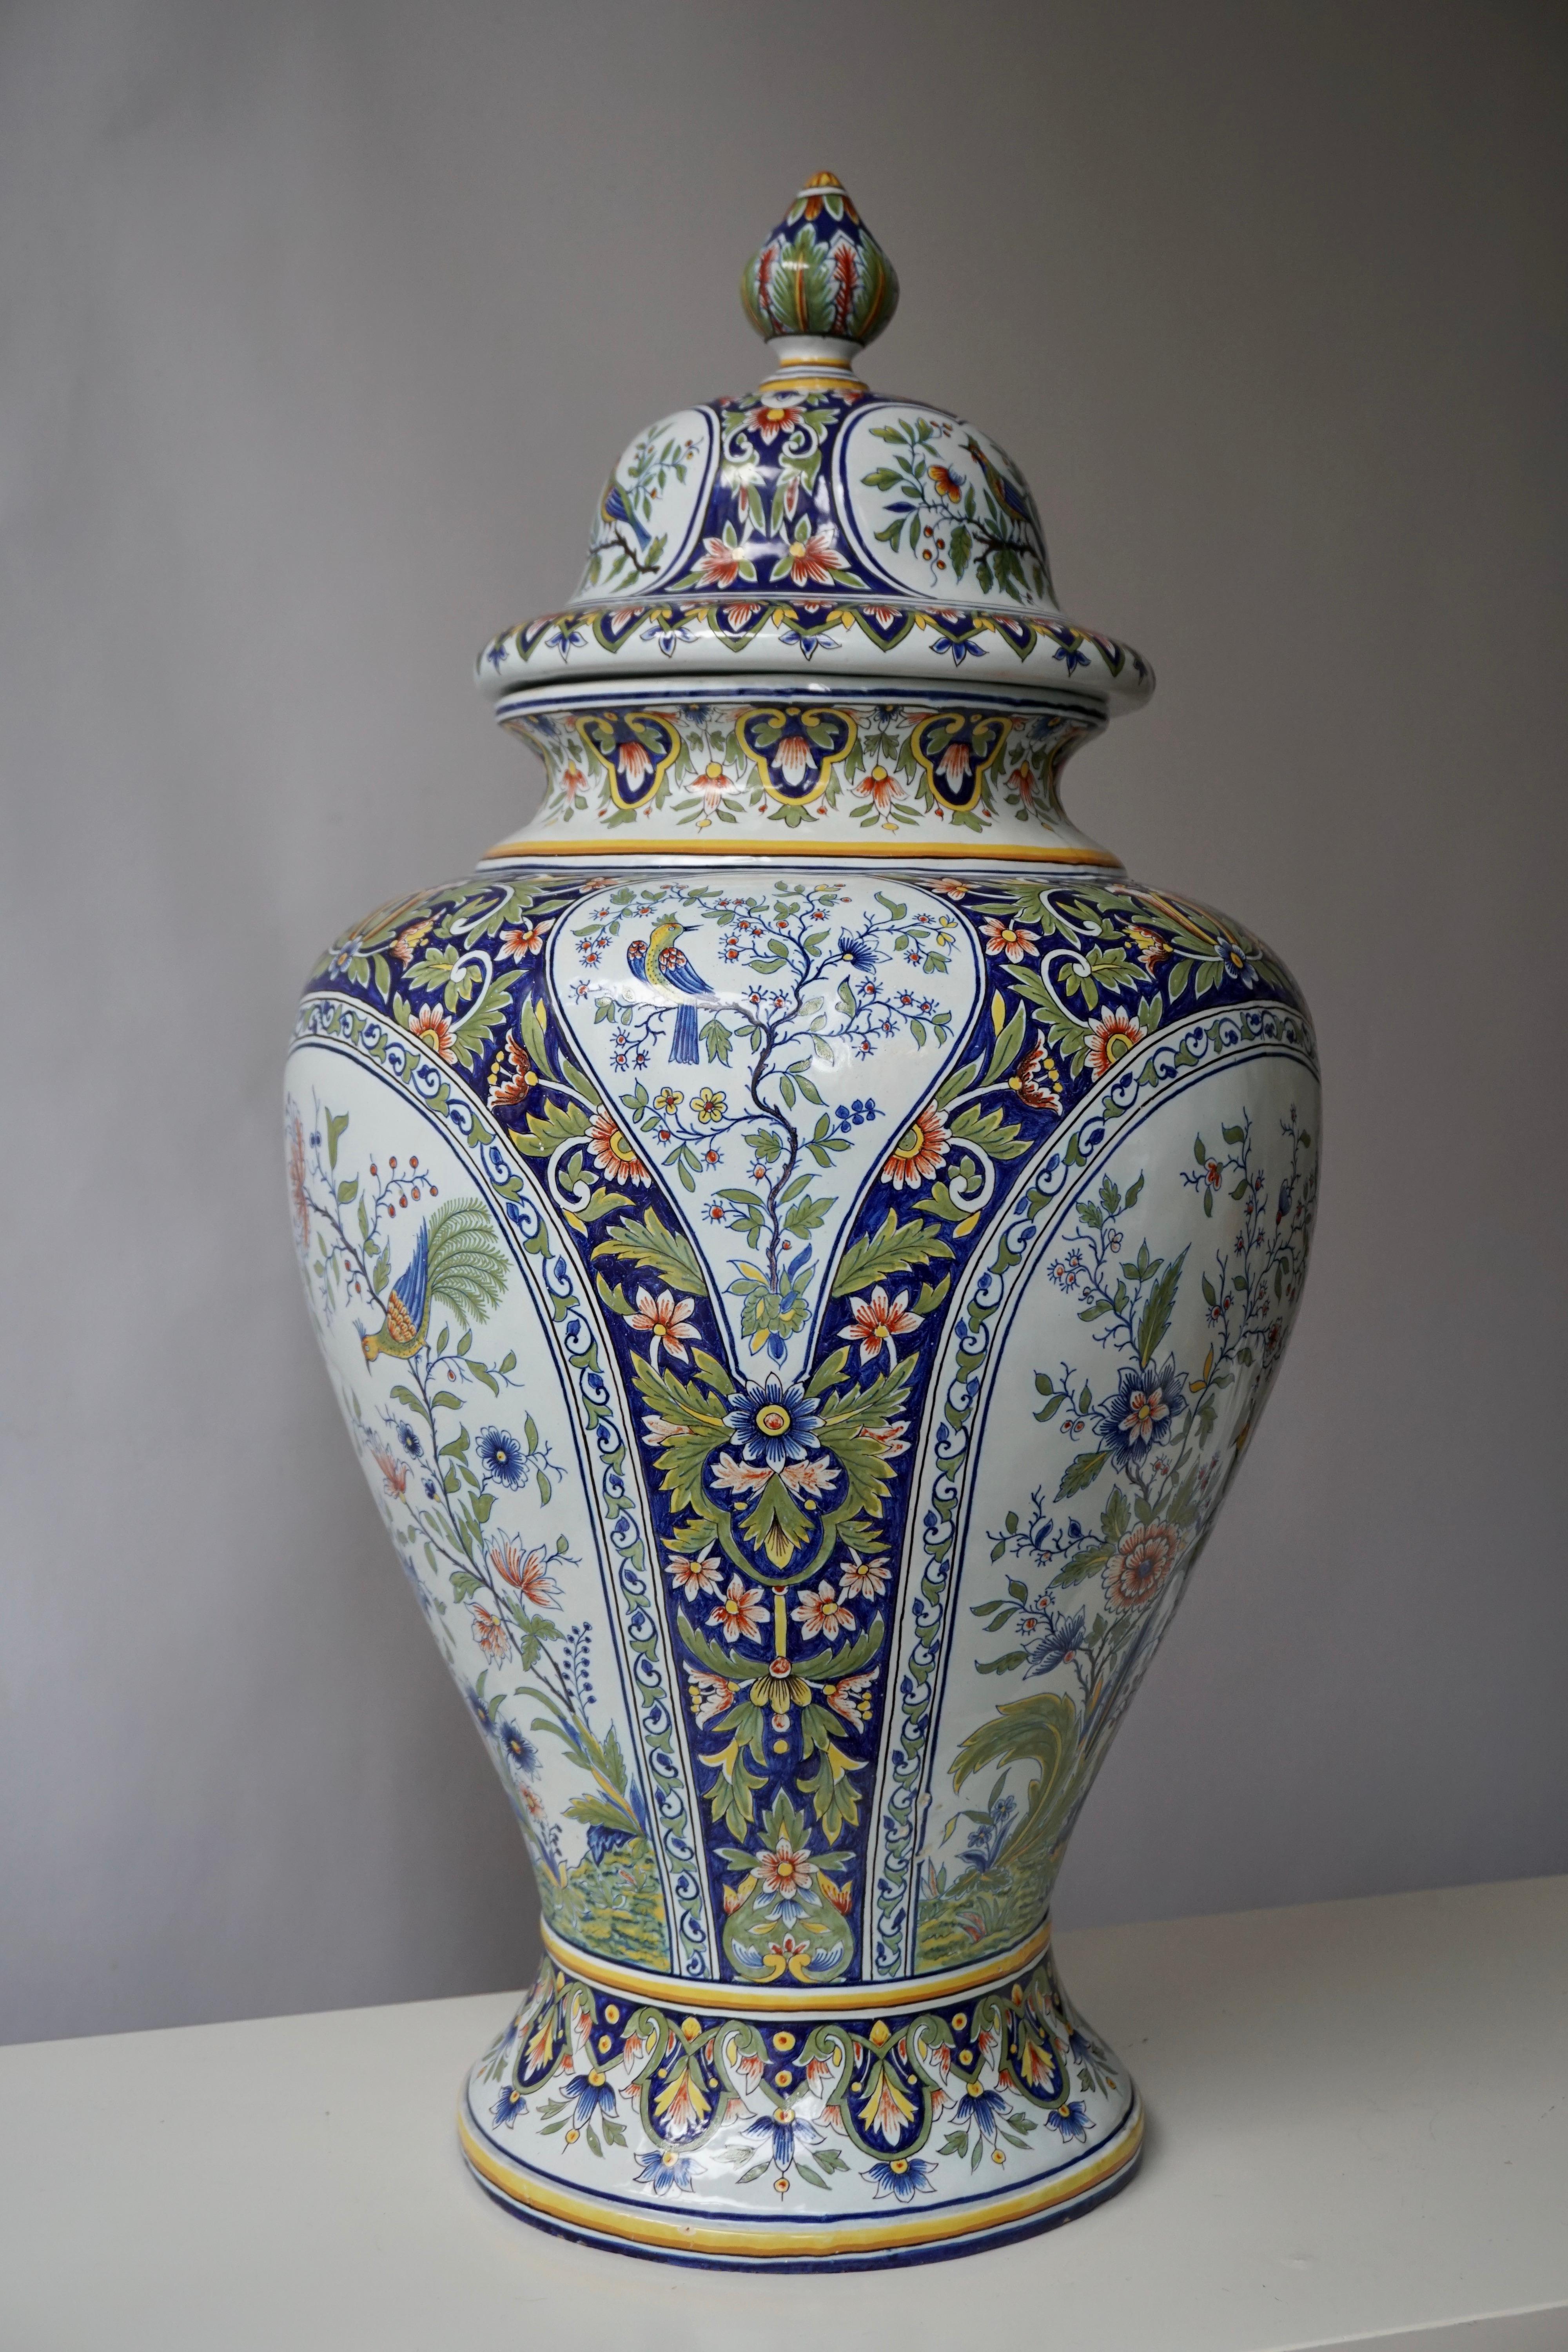 French Hand Painted Faience Urn or Vase with Flowers and Birds Motifs 5